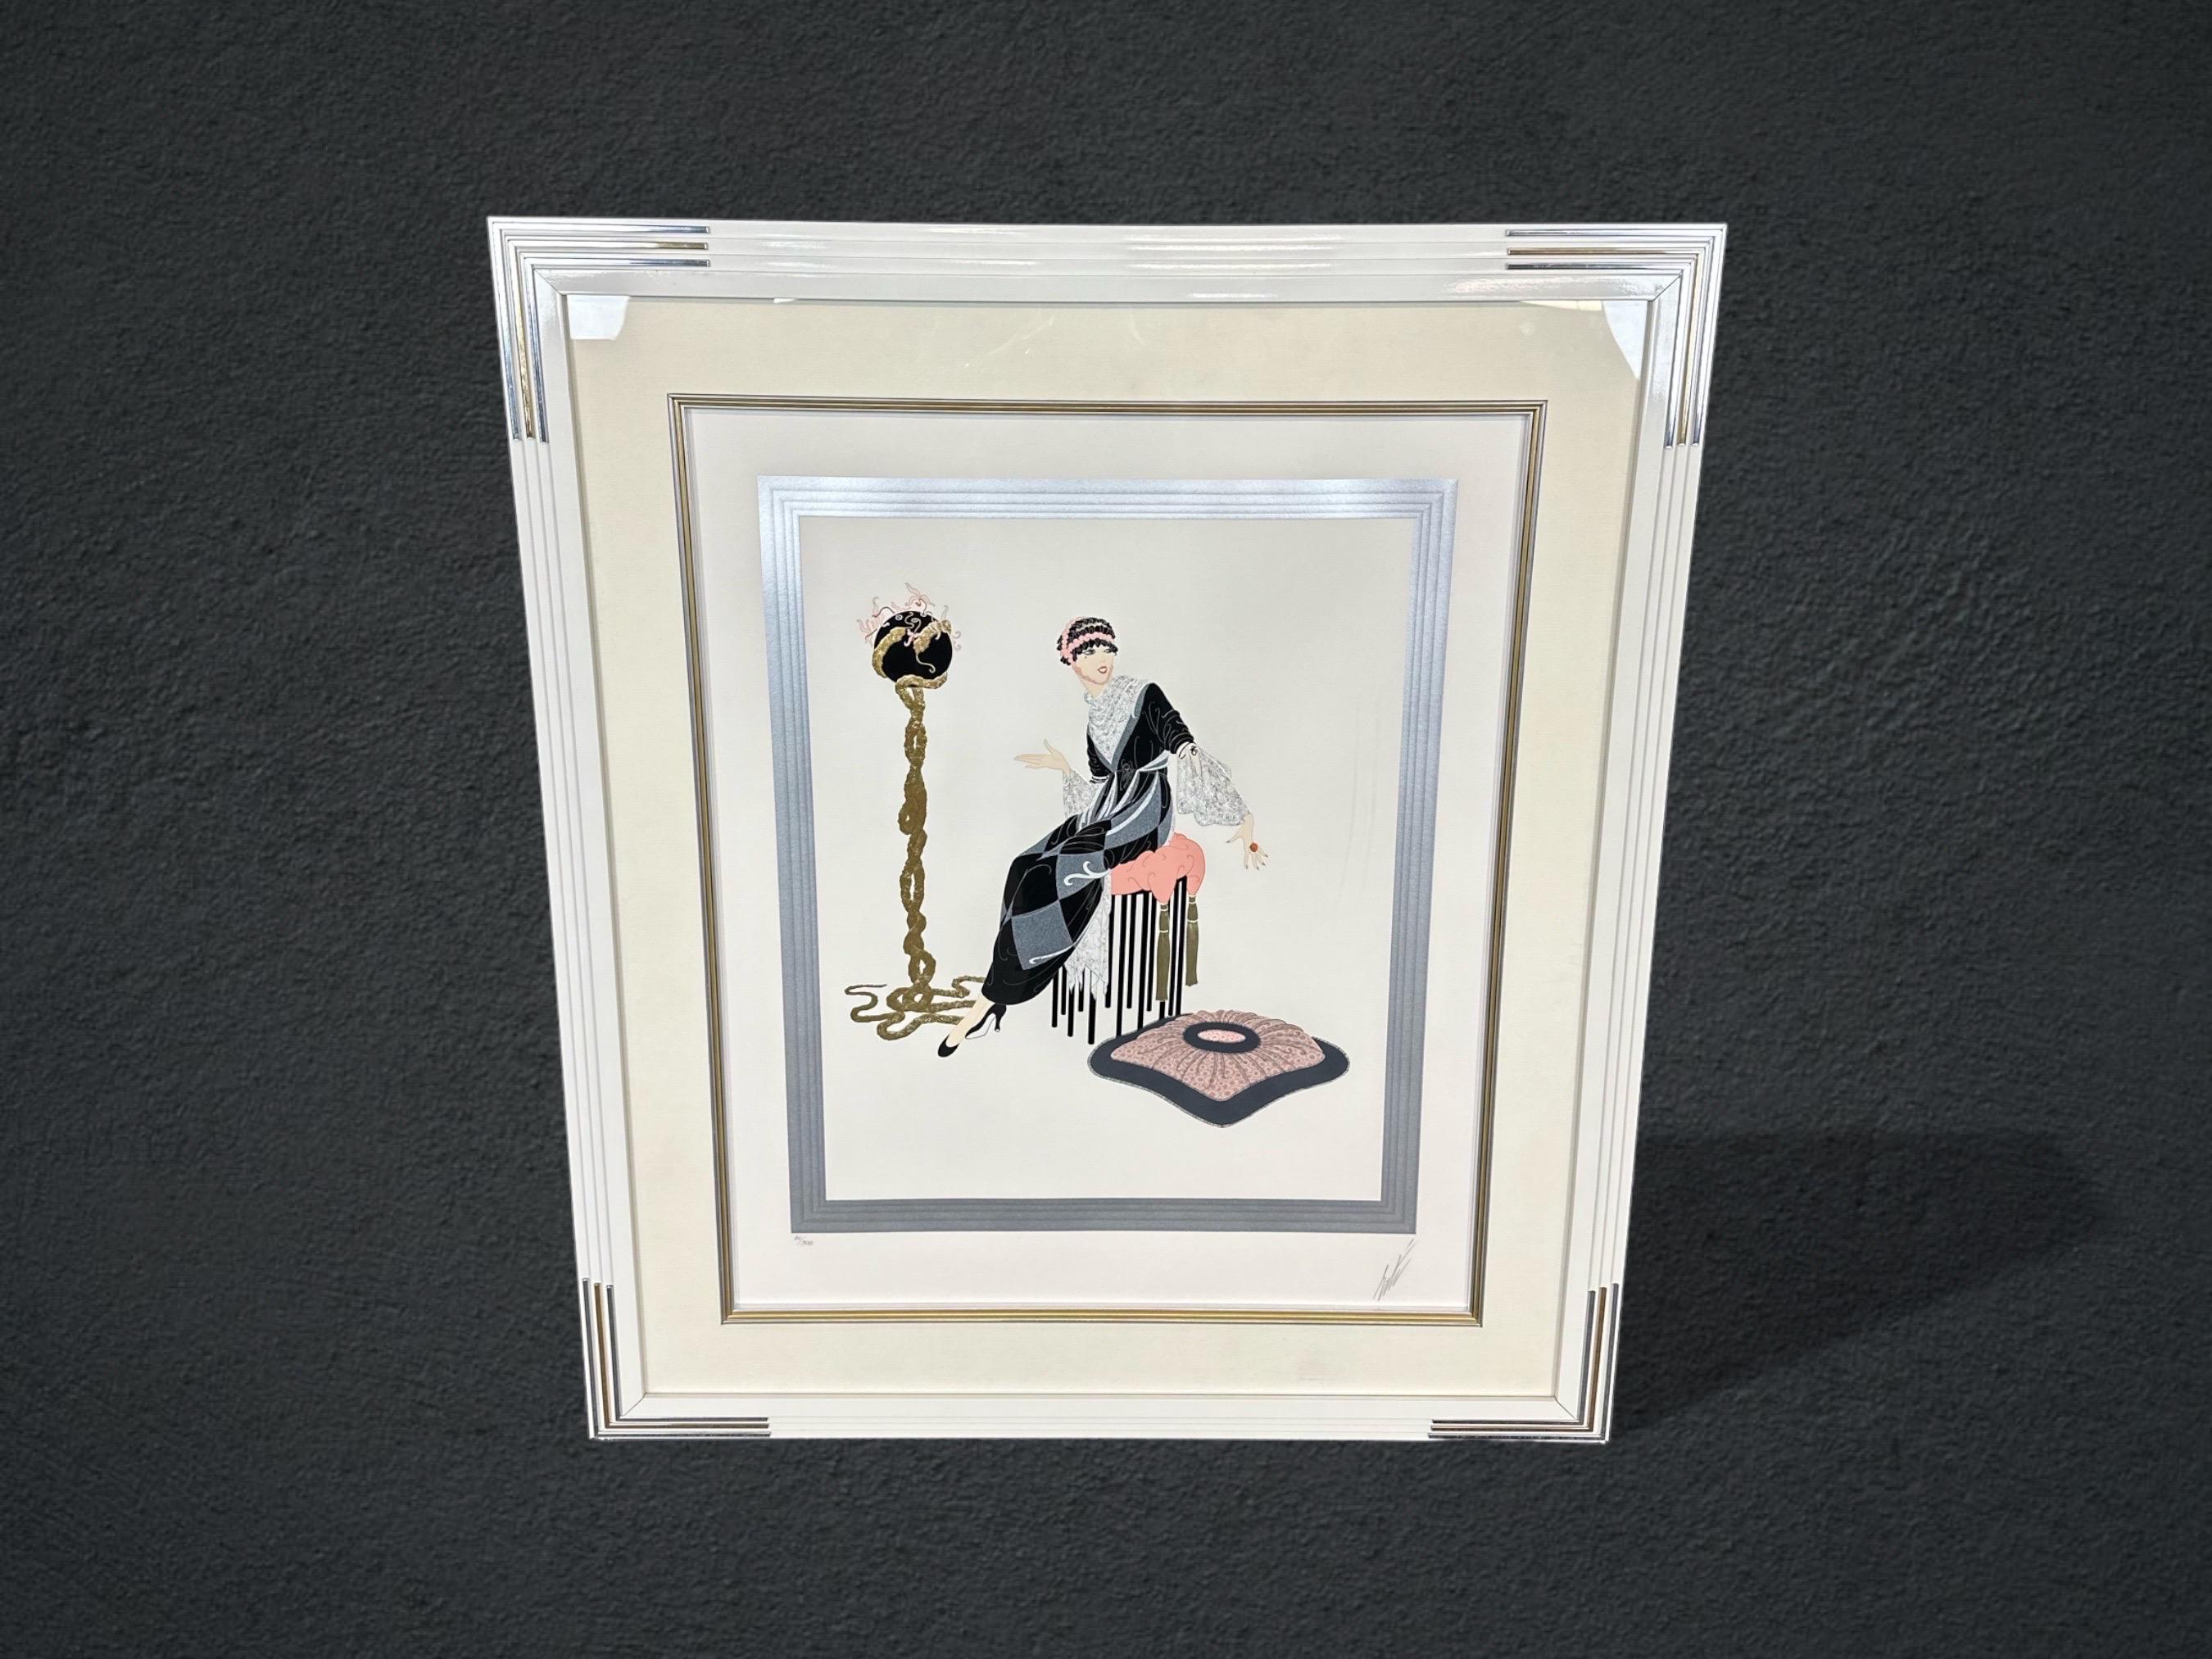 Signed and Numbered Vintage Art Deco Erté Serigraph Titled "Harmony"